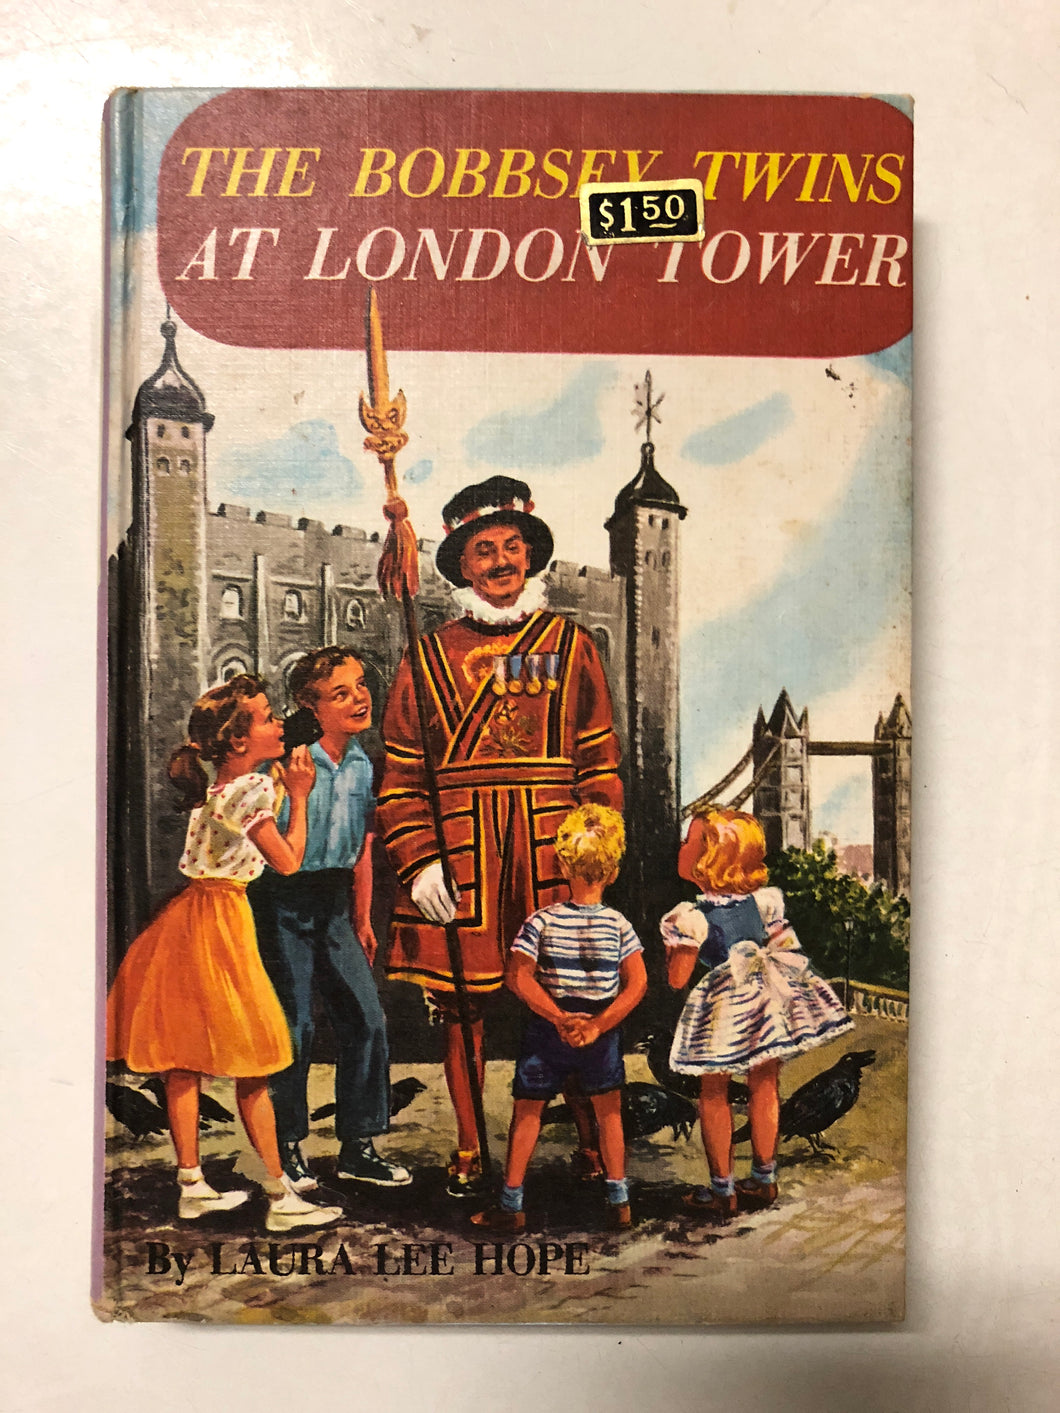 The Bobbsey Twins at London Tower - Slick Cat Books 